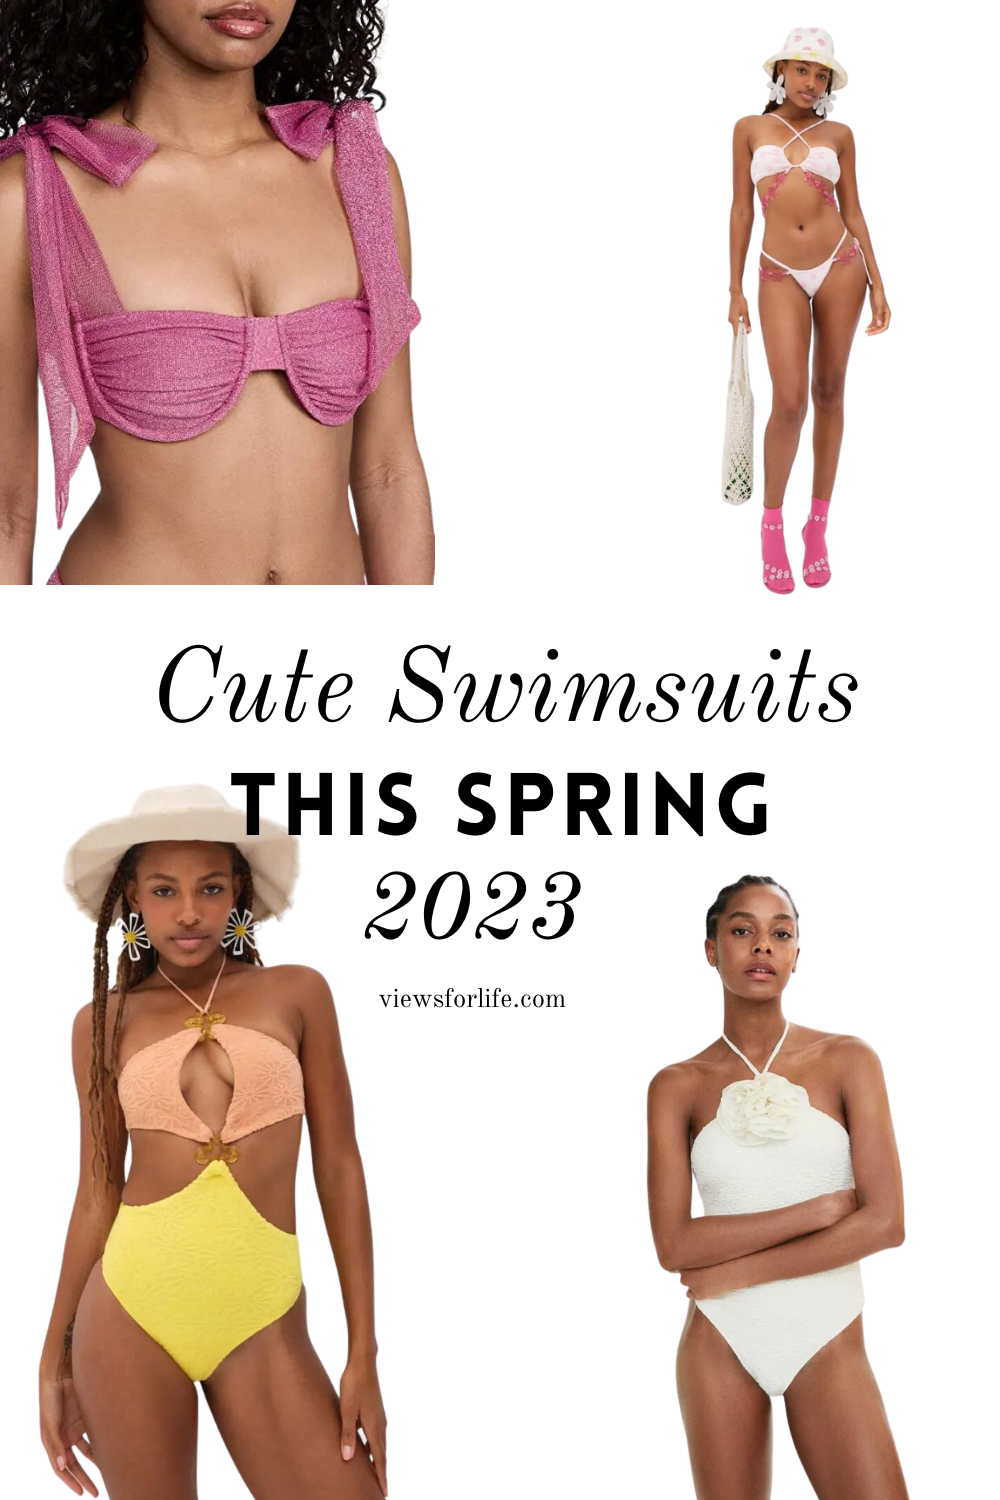 Spring break is coming—get ready by shopping for the 15+ best swimsuits this Spring 2023